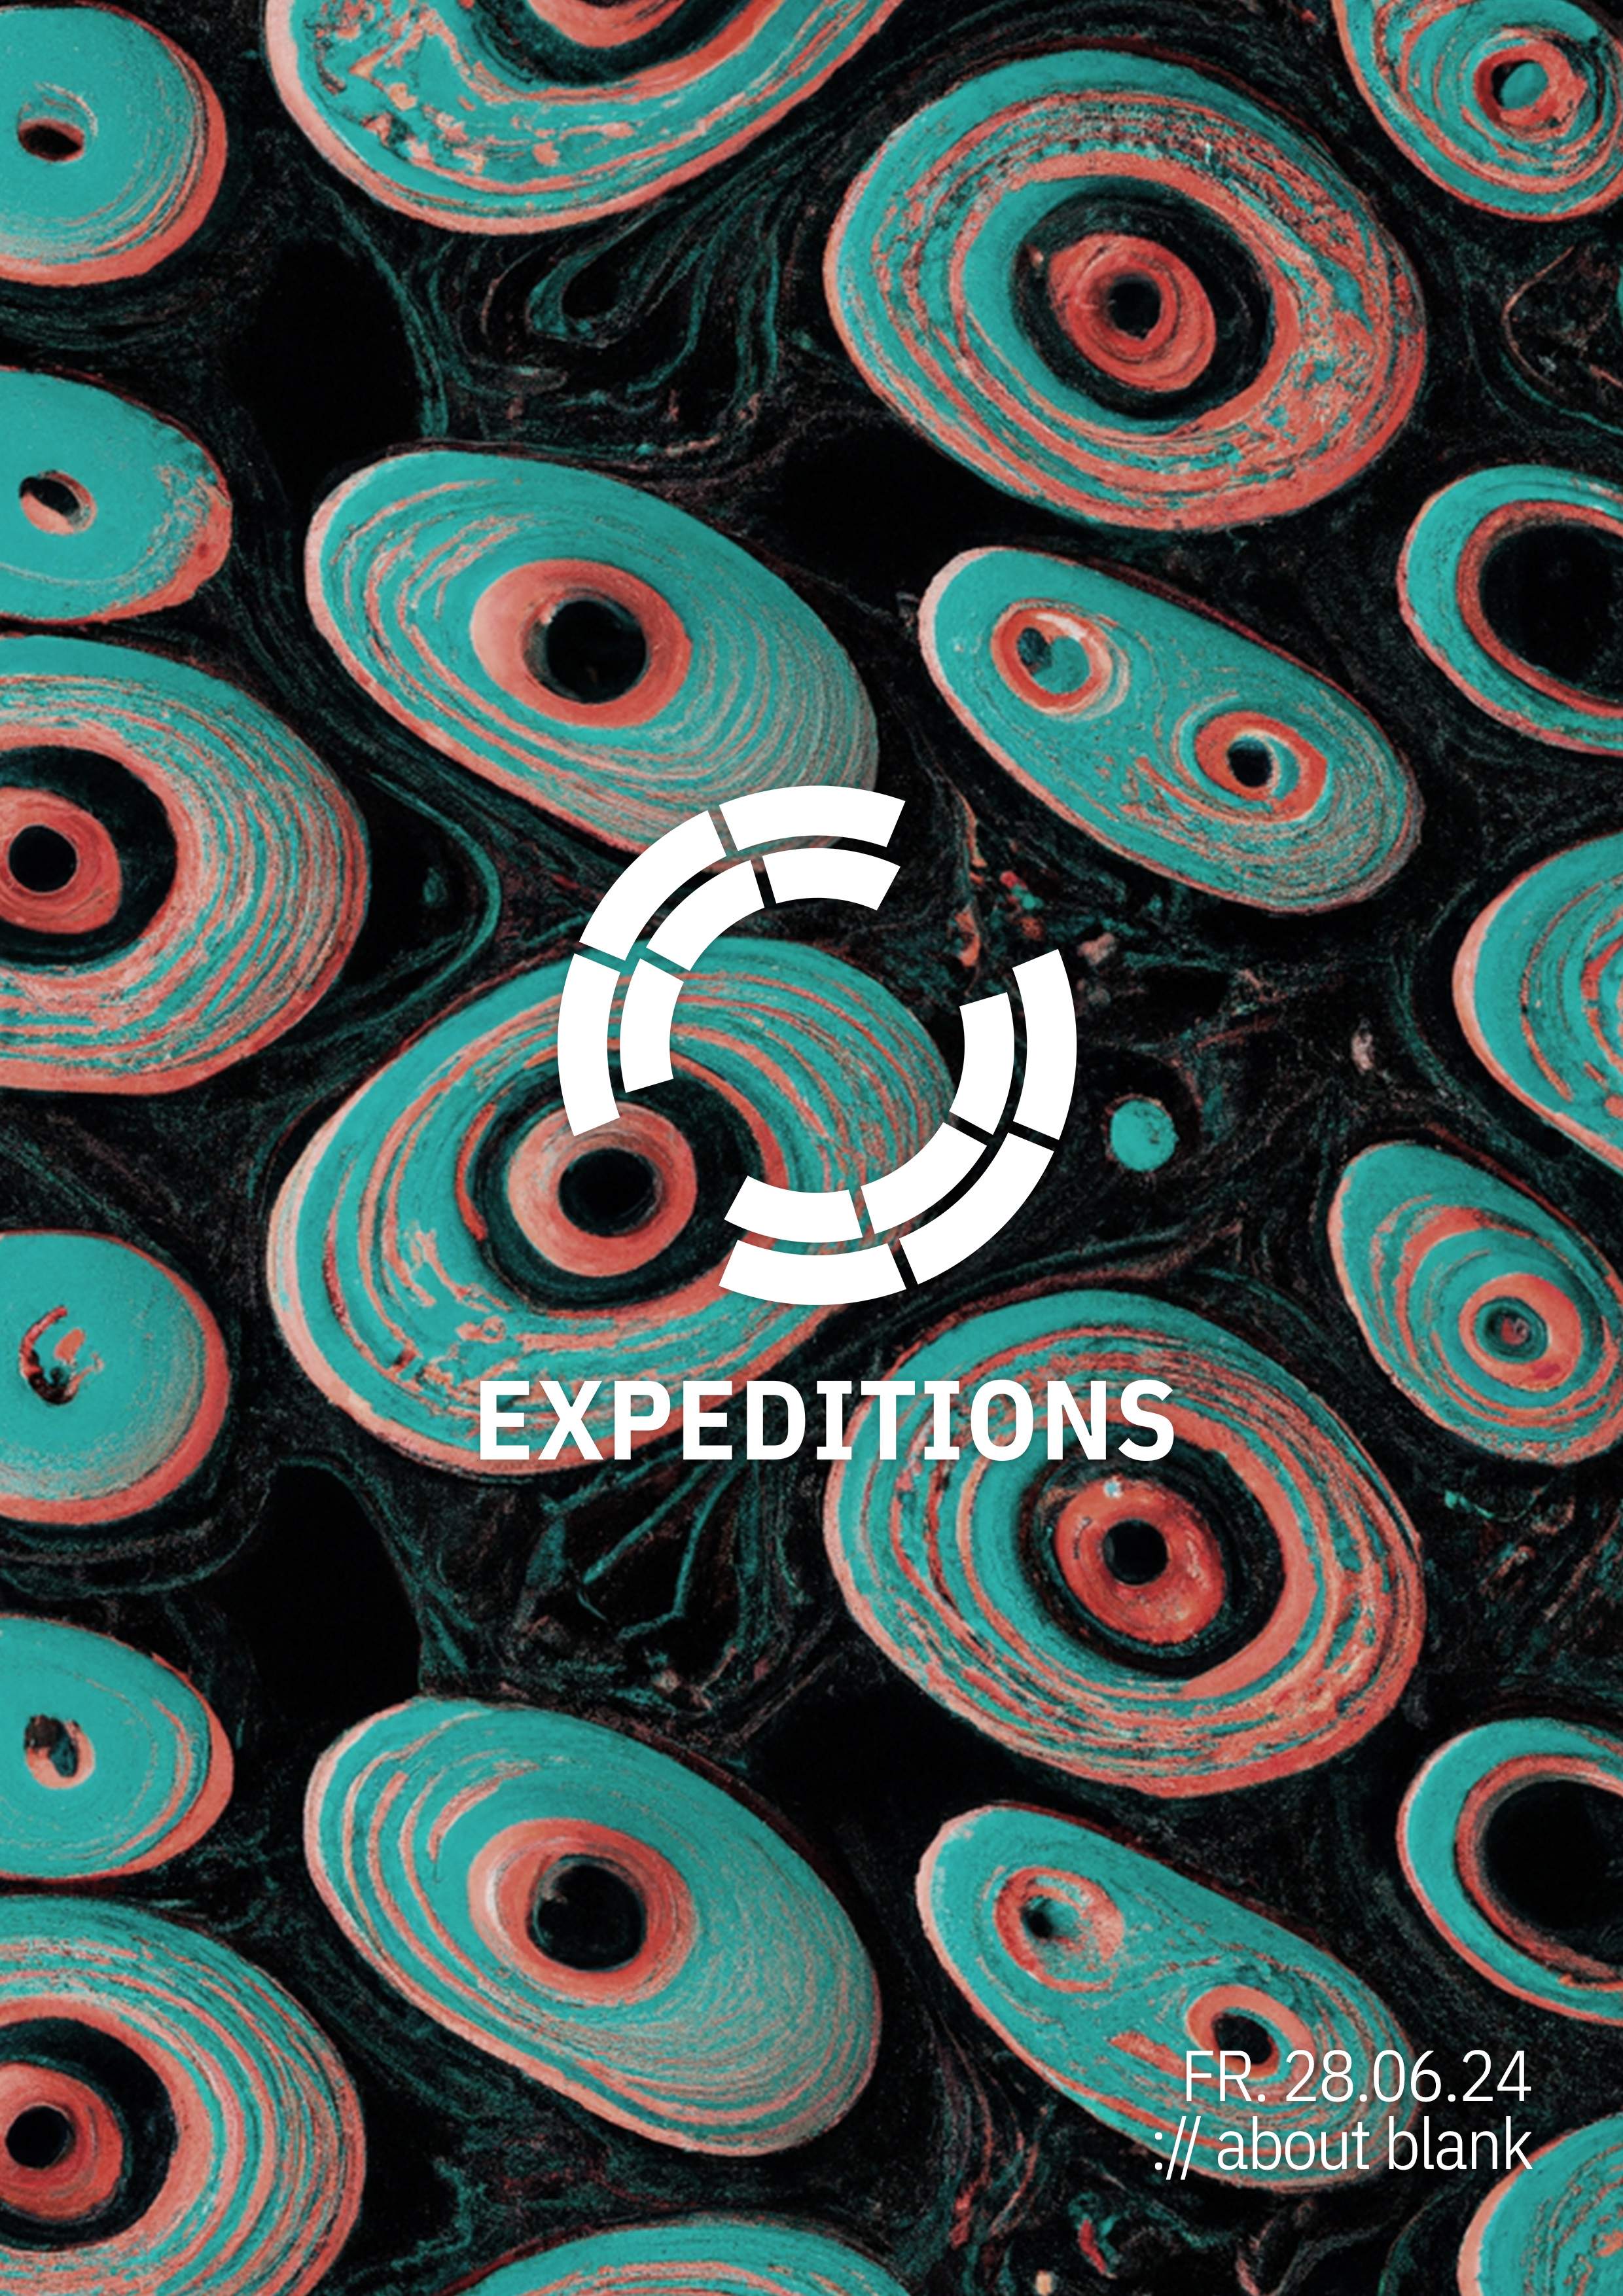 Expeditions - フライヤー表